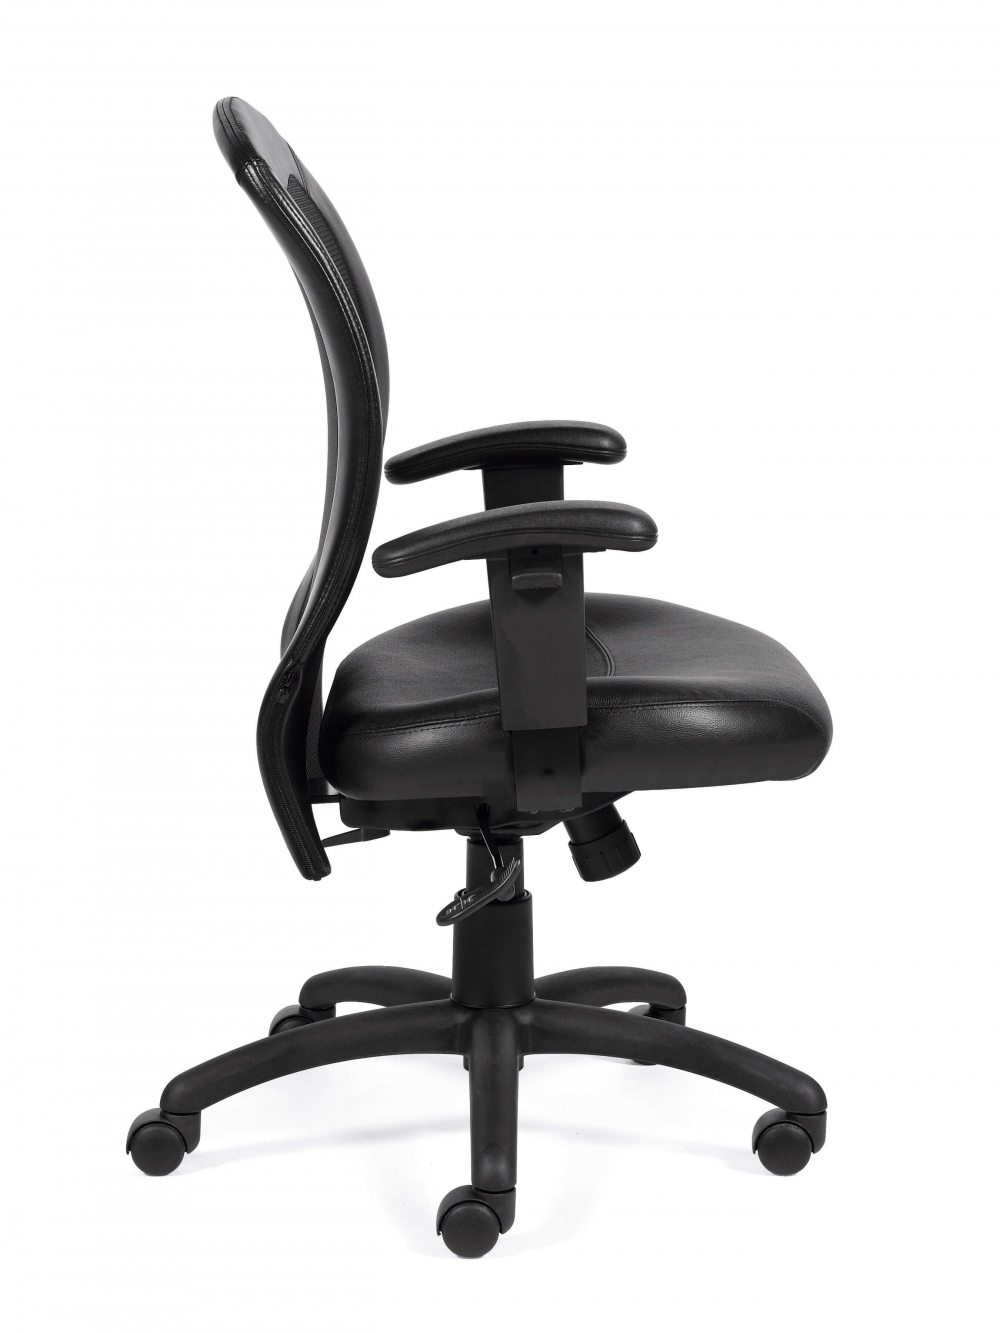 Contemporary office chair side view